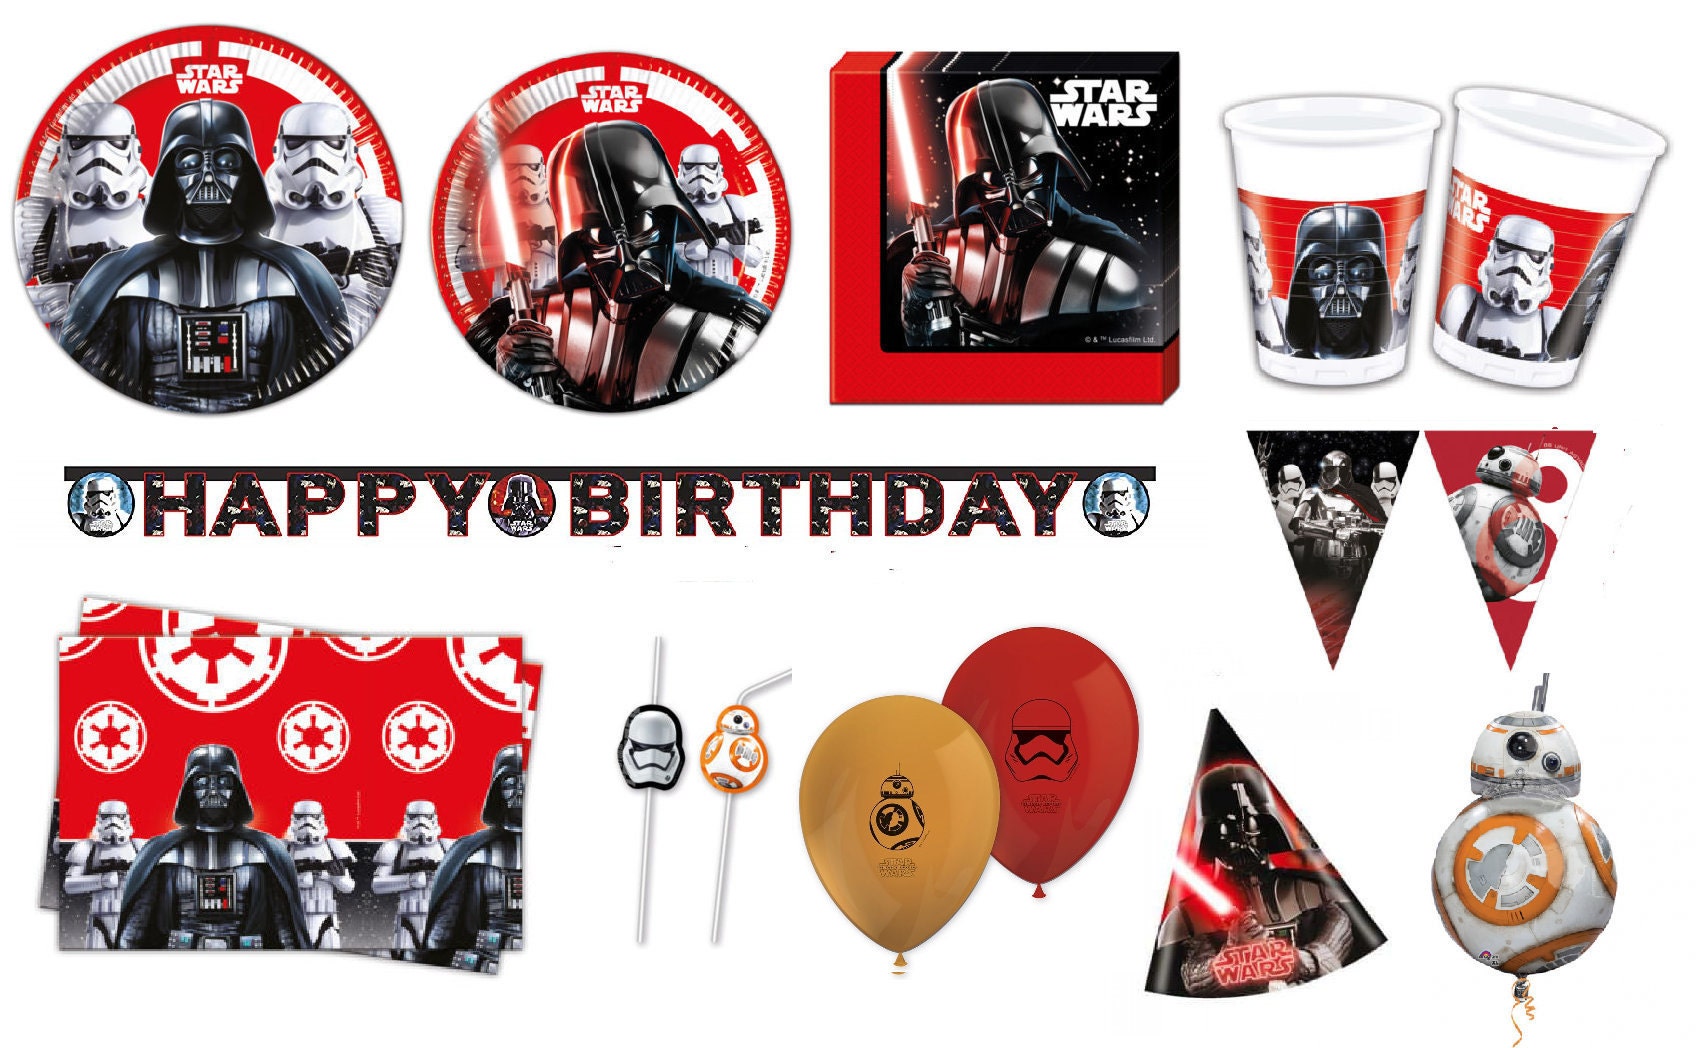 Star Wars Party Supplies Decoration Balloons Napkins Plates - Etsy